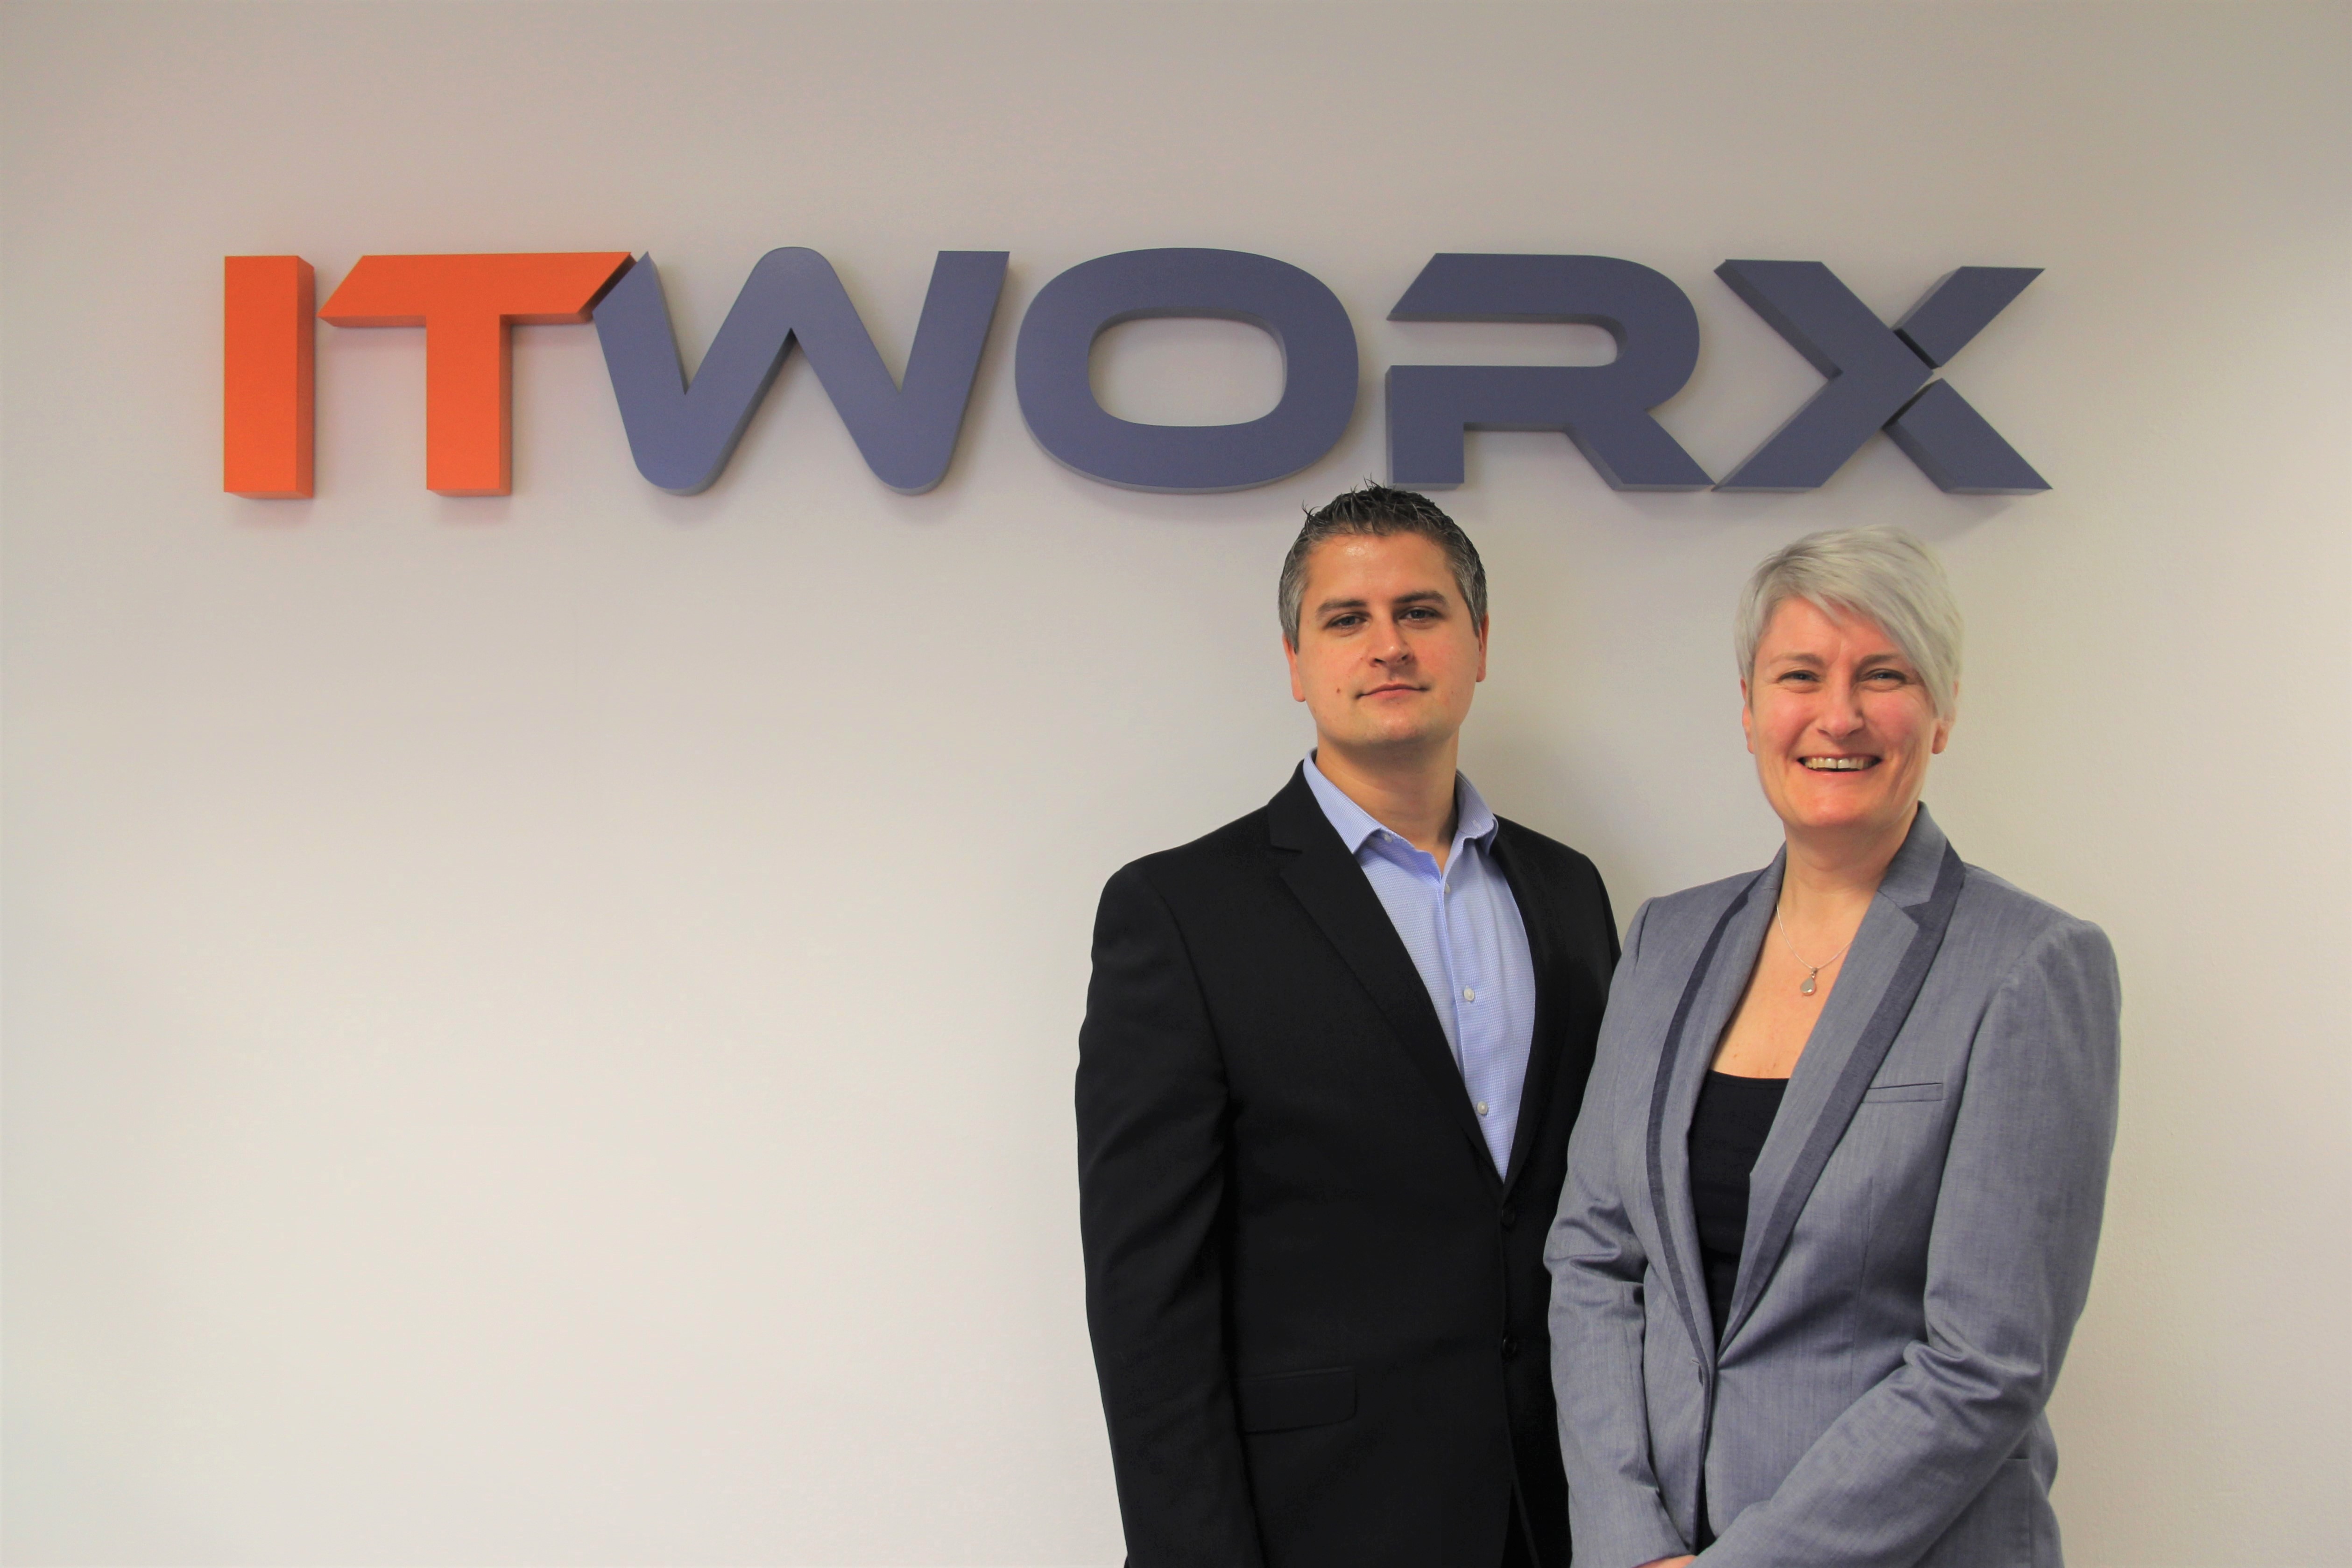 ITWORX moves into employee ownership